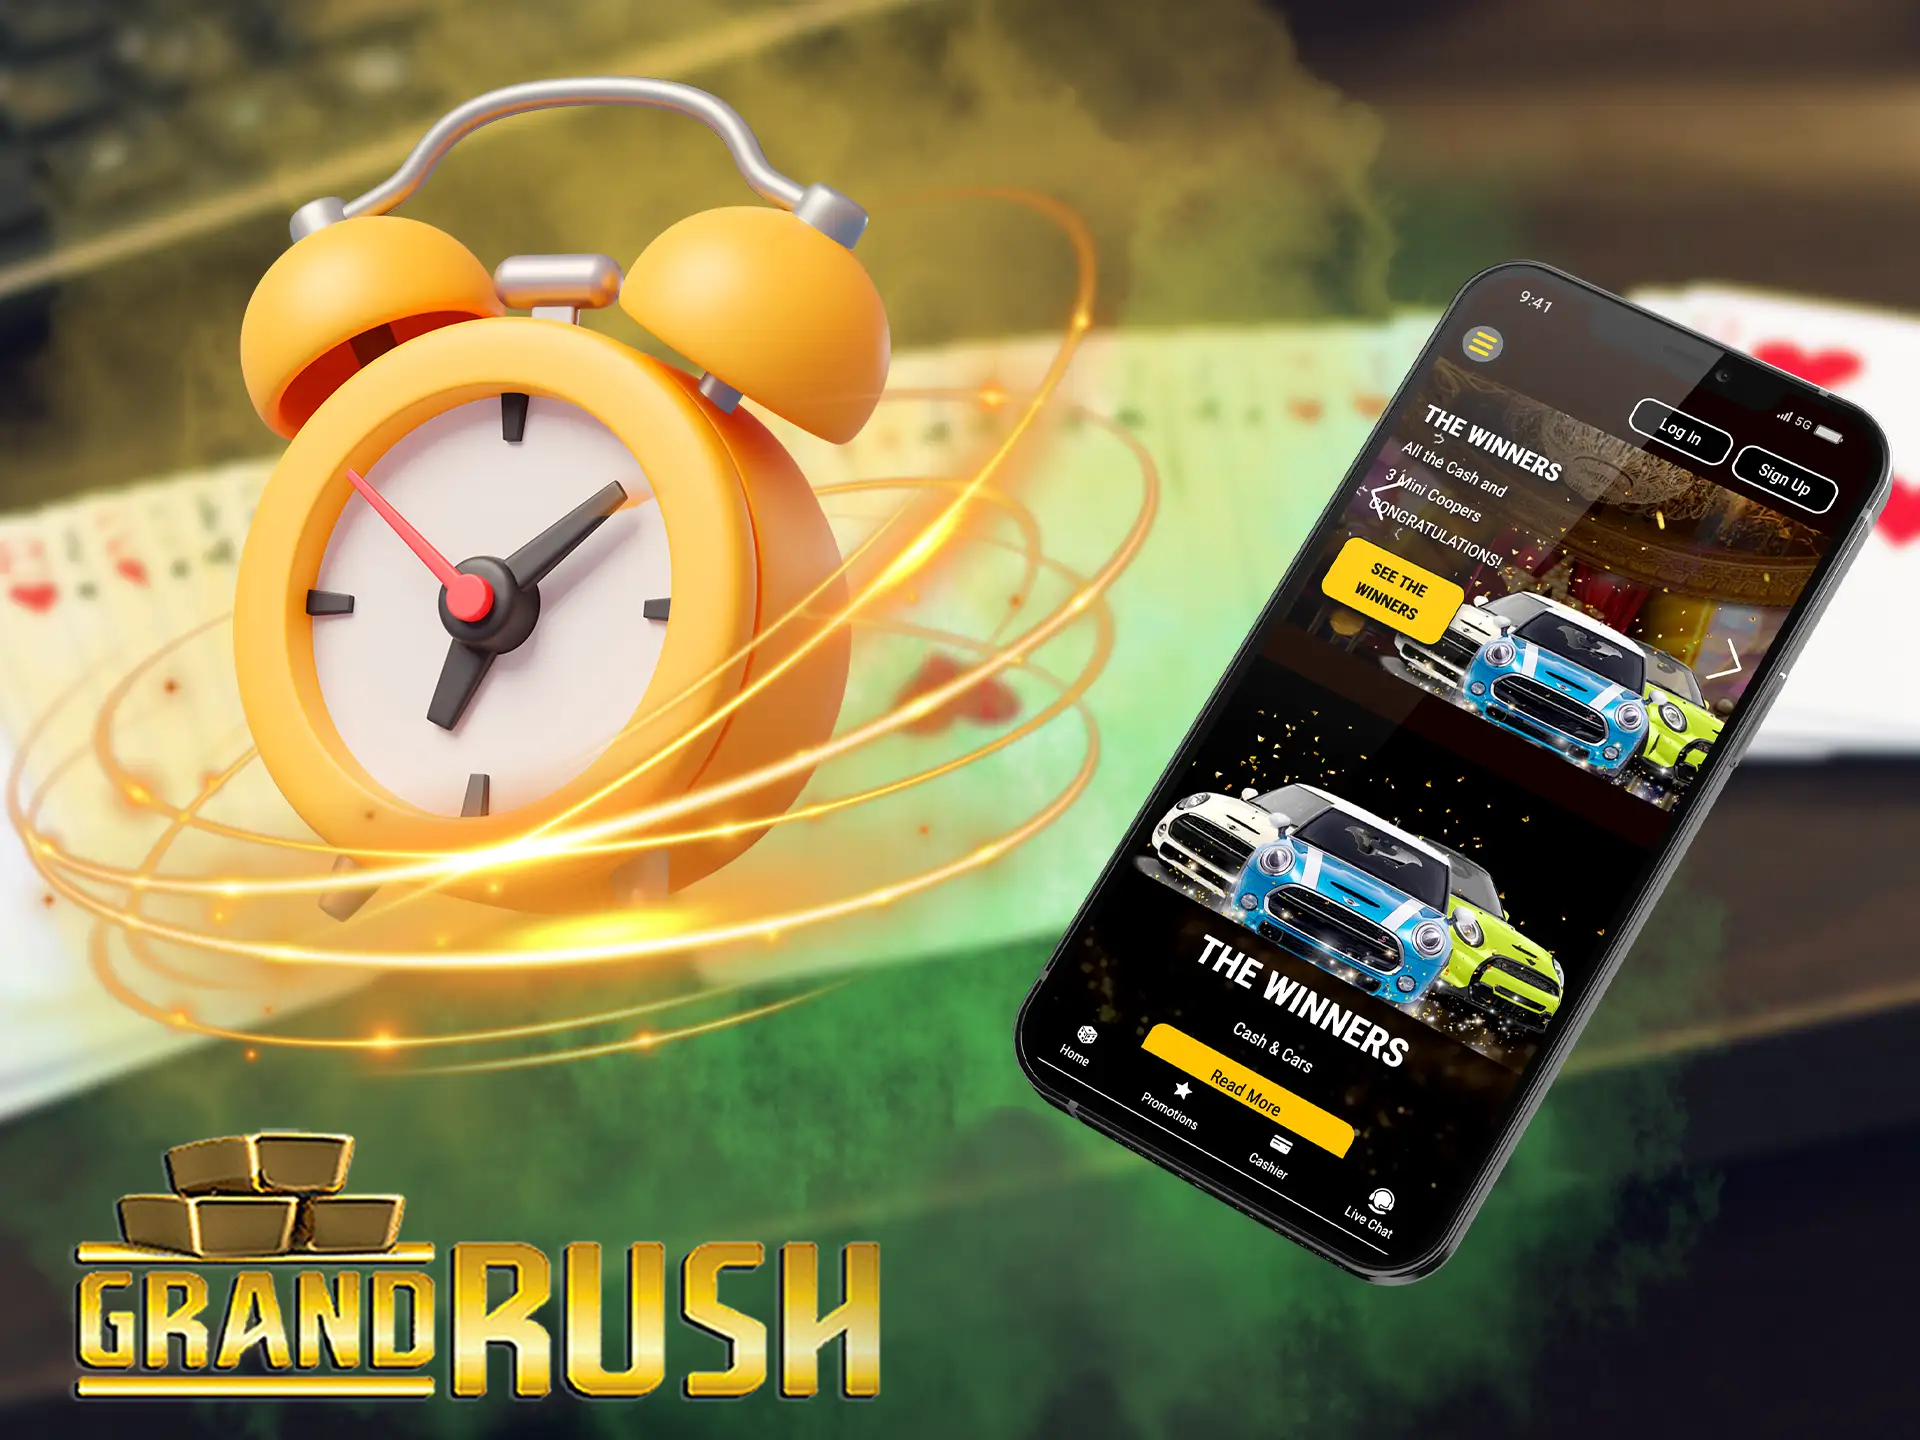 Claim 100 free spins during Grand Rush Happy Hours bonus from 12 noon to 2 pm.